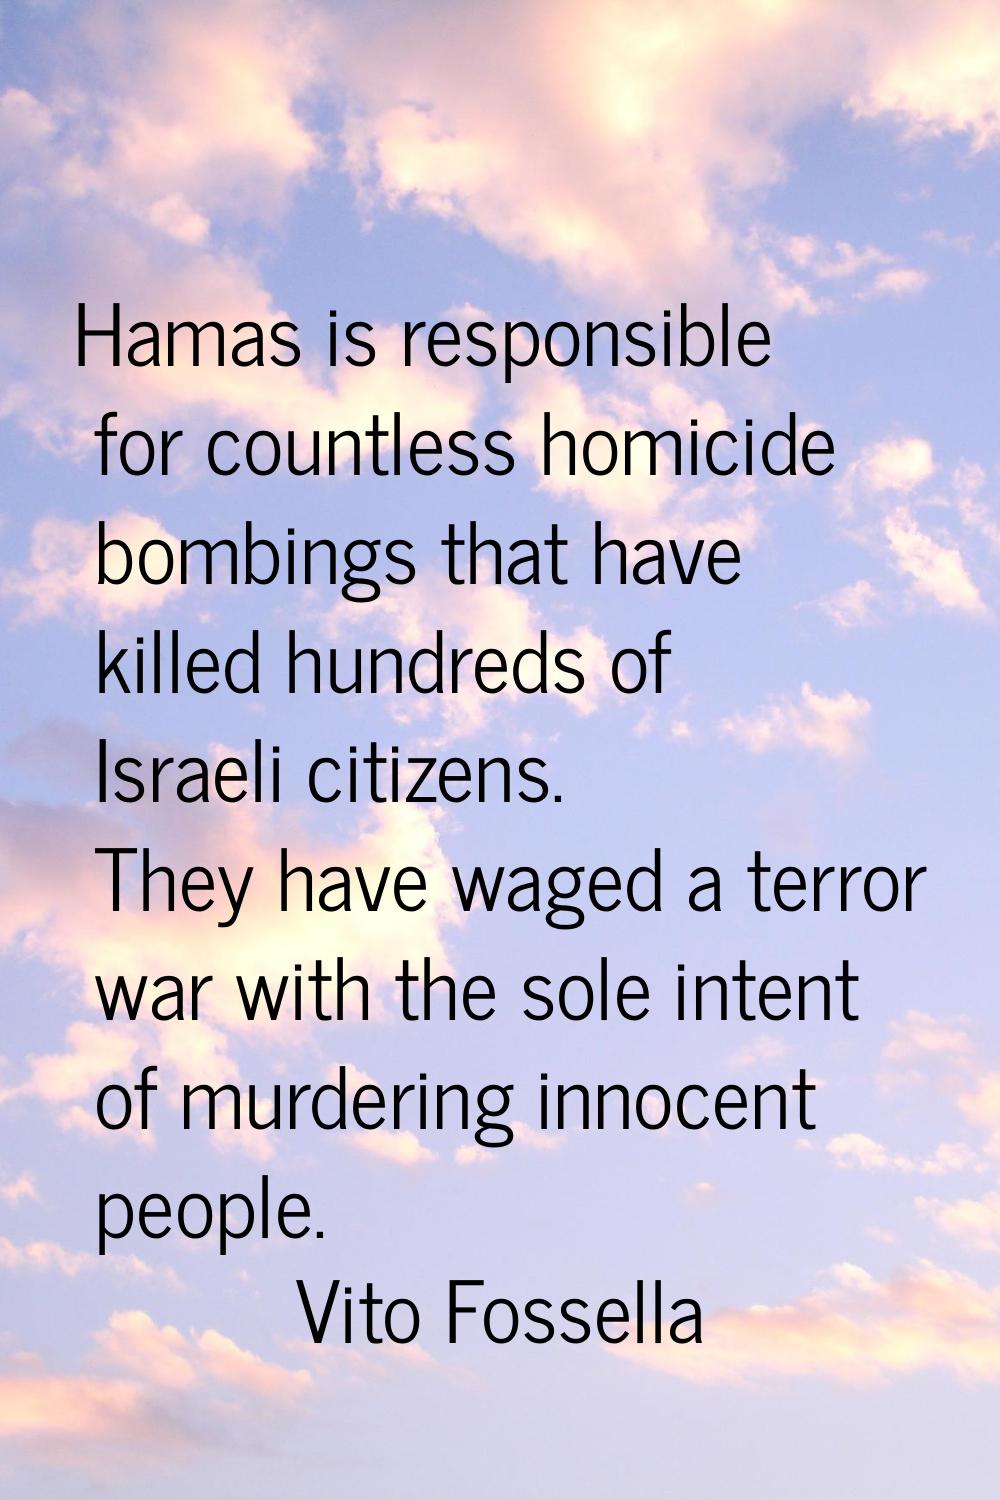 Hamas is responsible for countless homicide bombings that have killed hundreds of Israeli citizens.